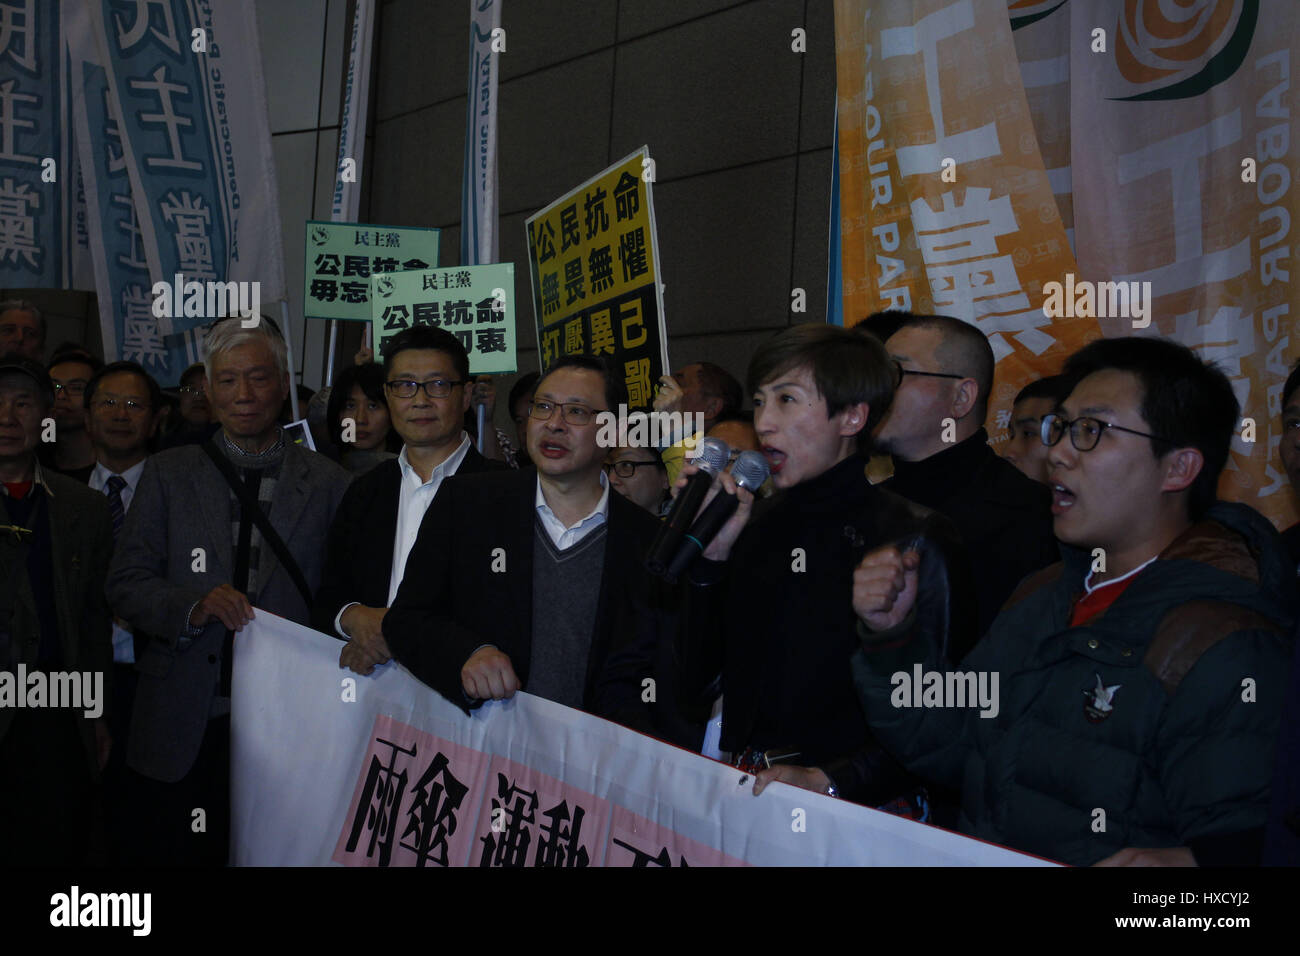 March 27, 2017 - 9 members, including 3 person who played key role in 2014 UMBRELLA MOVEMENT-Occupation Central, Reverend Chiu Yiu-ming ( L ), academic, Chan Kin-man ( Second from left ) and Benny Tai ( third from left ) are today charged with 3 accounts of crime which include citing social unrest etc. All 9 accused demonstrated outside Hong Kong Police Headquarter in the evening surrounded by hundred of supporters. 2017, 3-27. Hong Kong. ZUMA/Liau Chung Ren Credit: Liau Chung Ren/ZUMA Wire/Alamy Live News Stock Photo